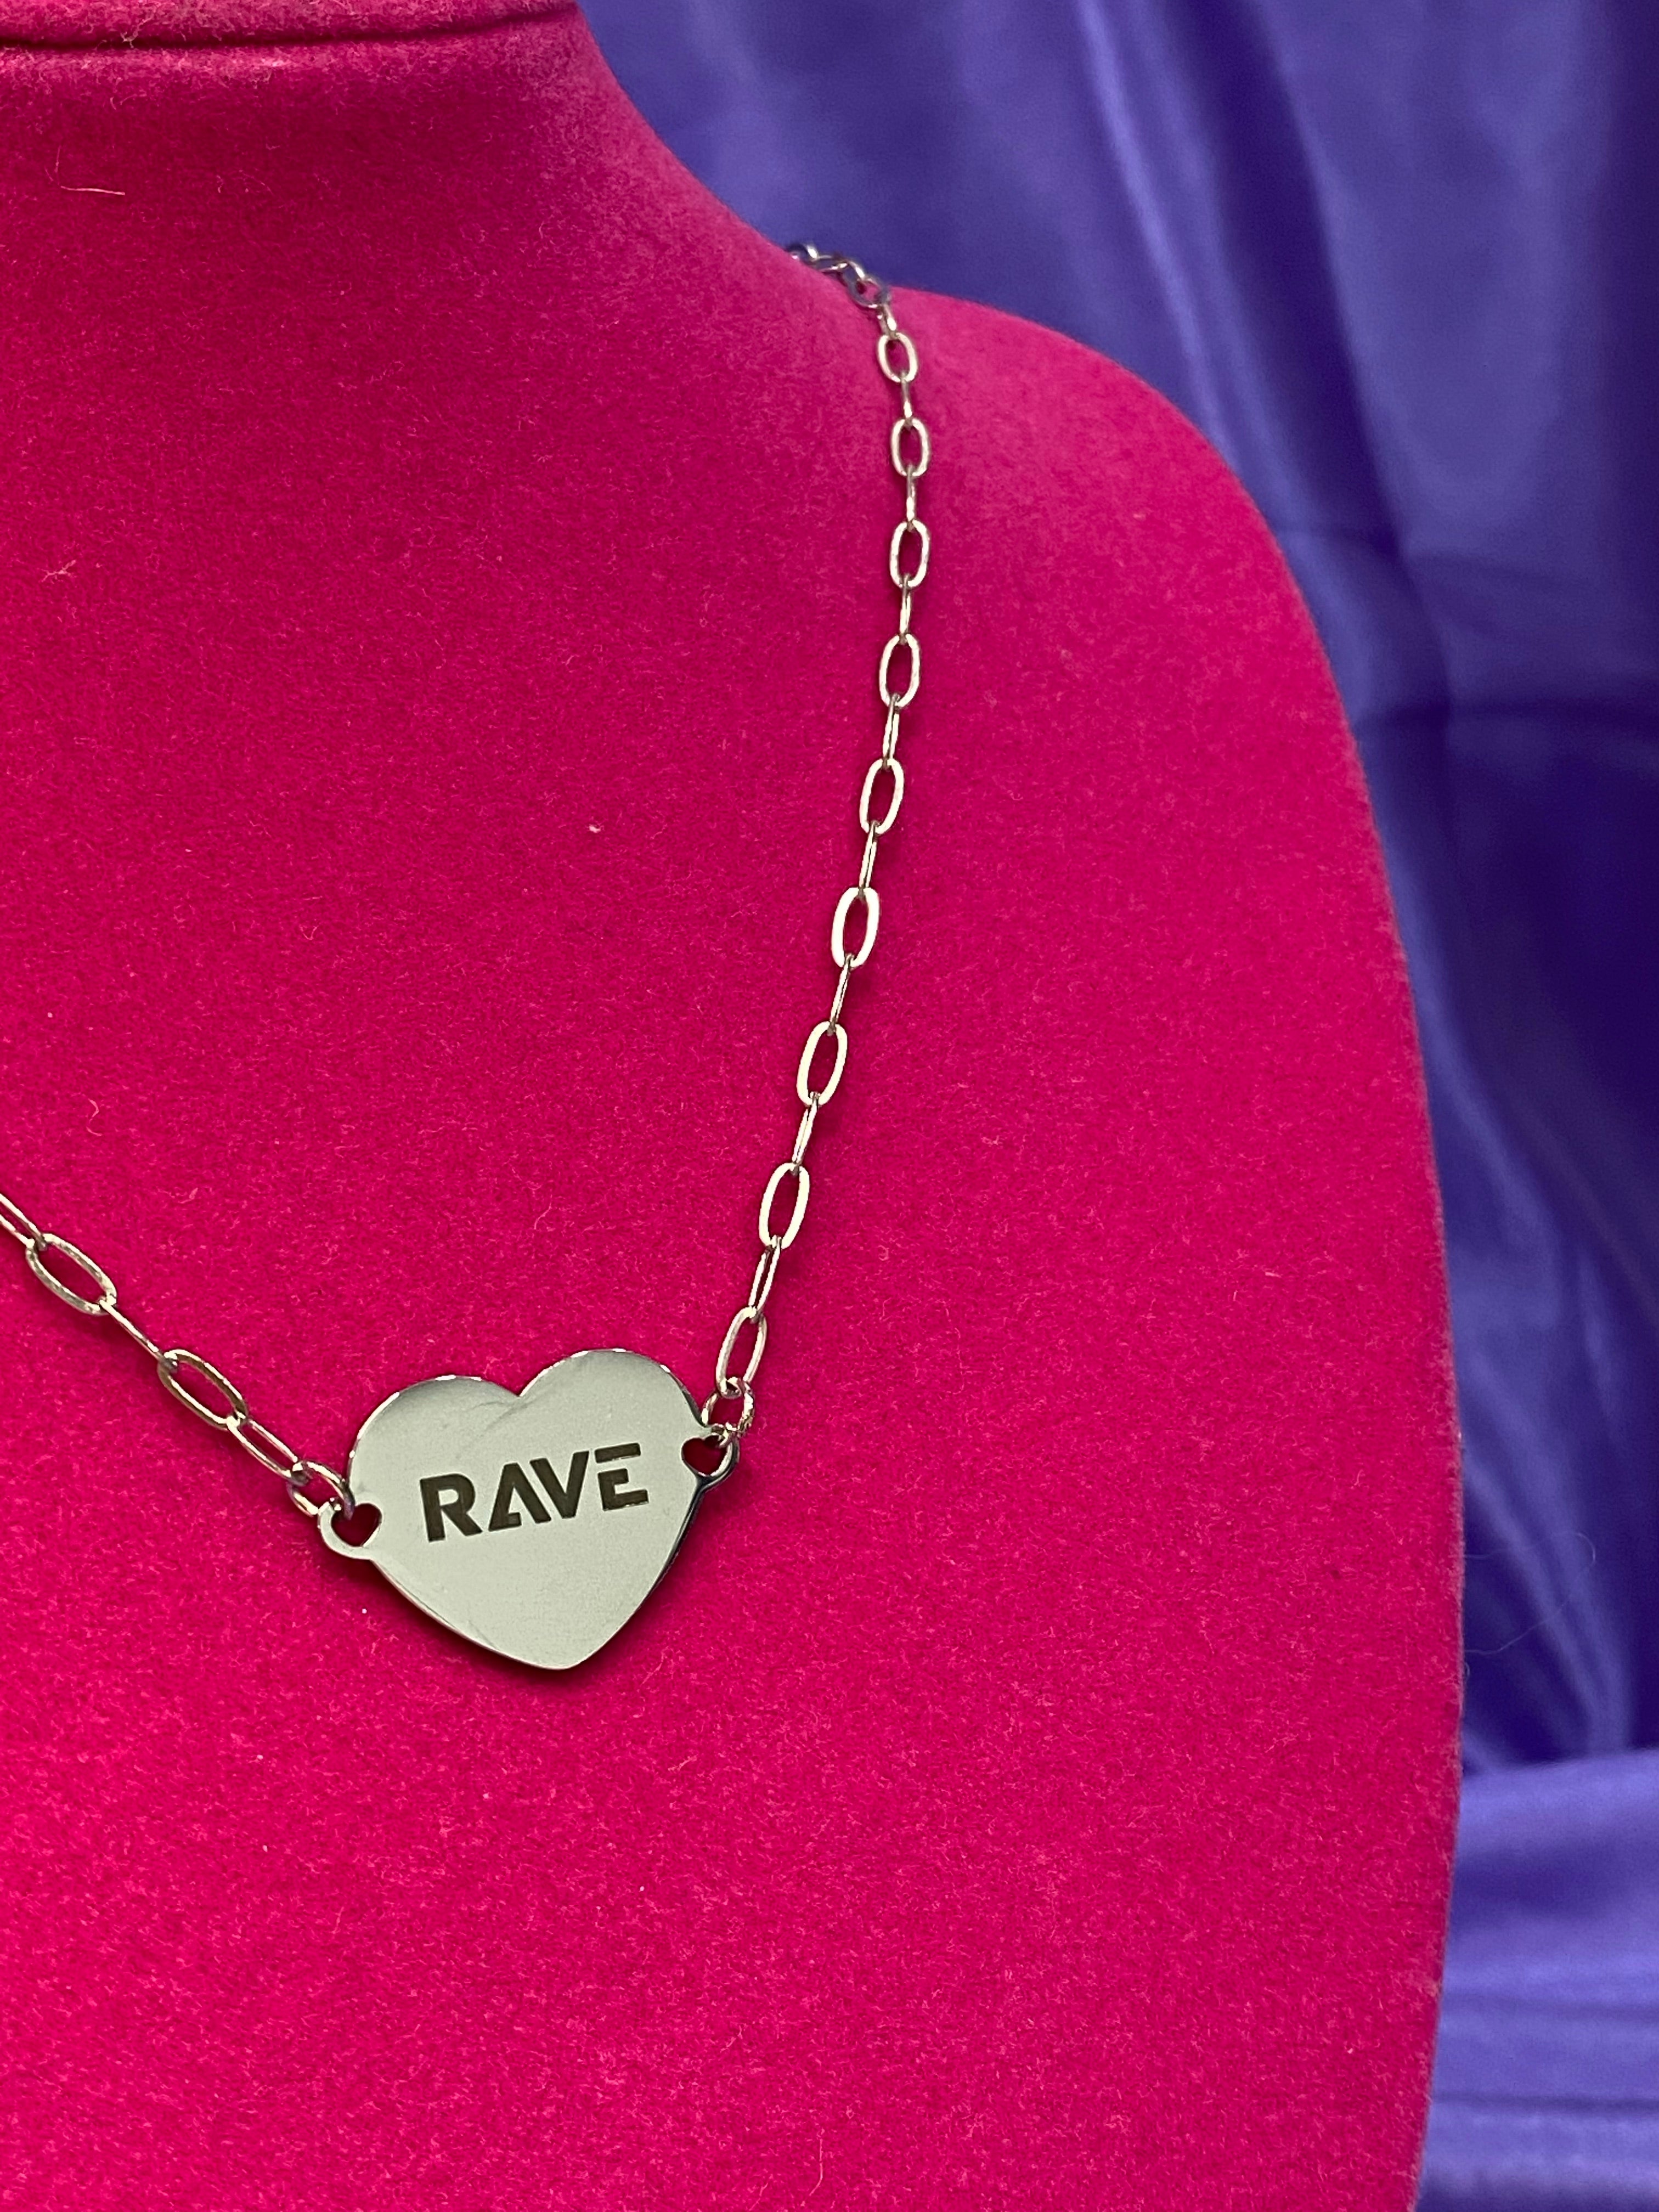 ‘Rave’ engraved necklace✌🏽